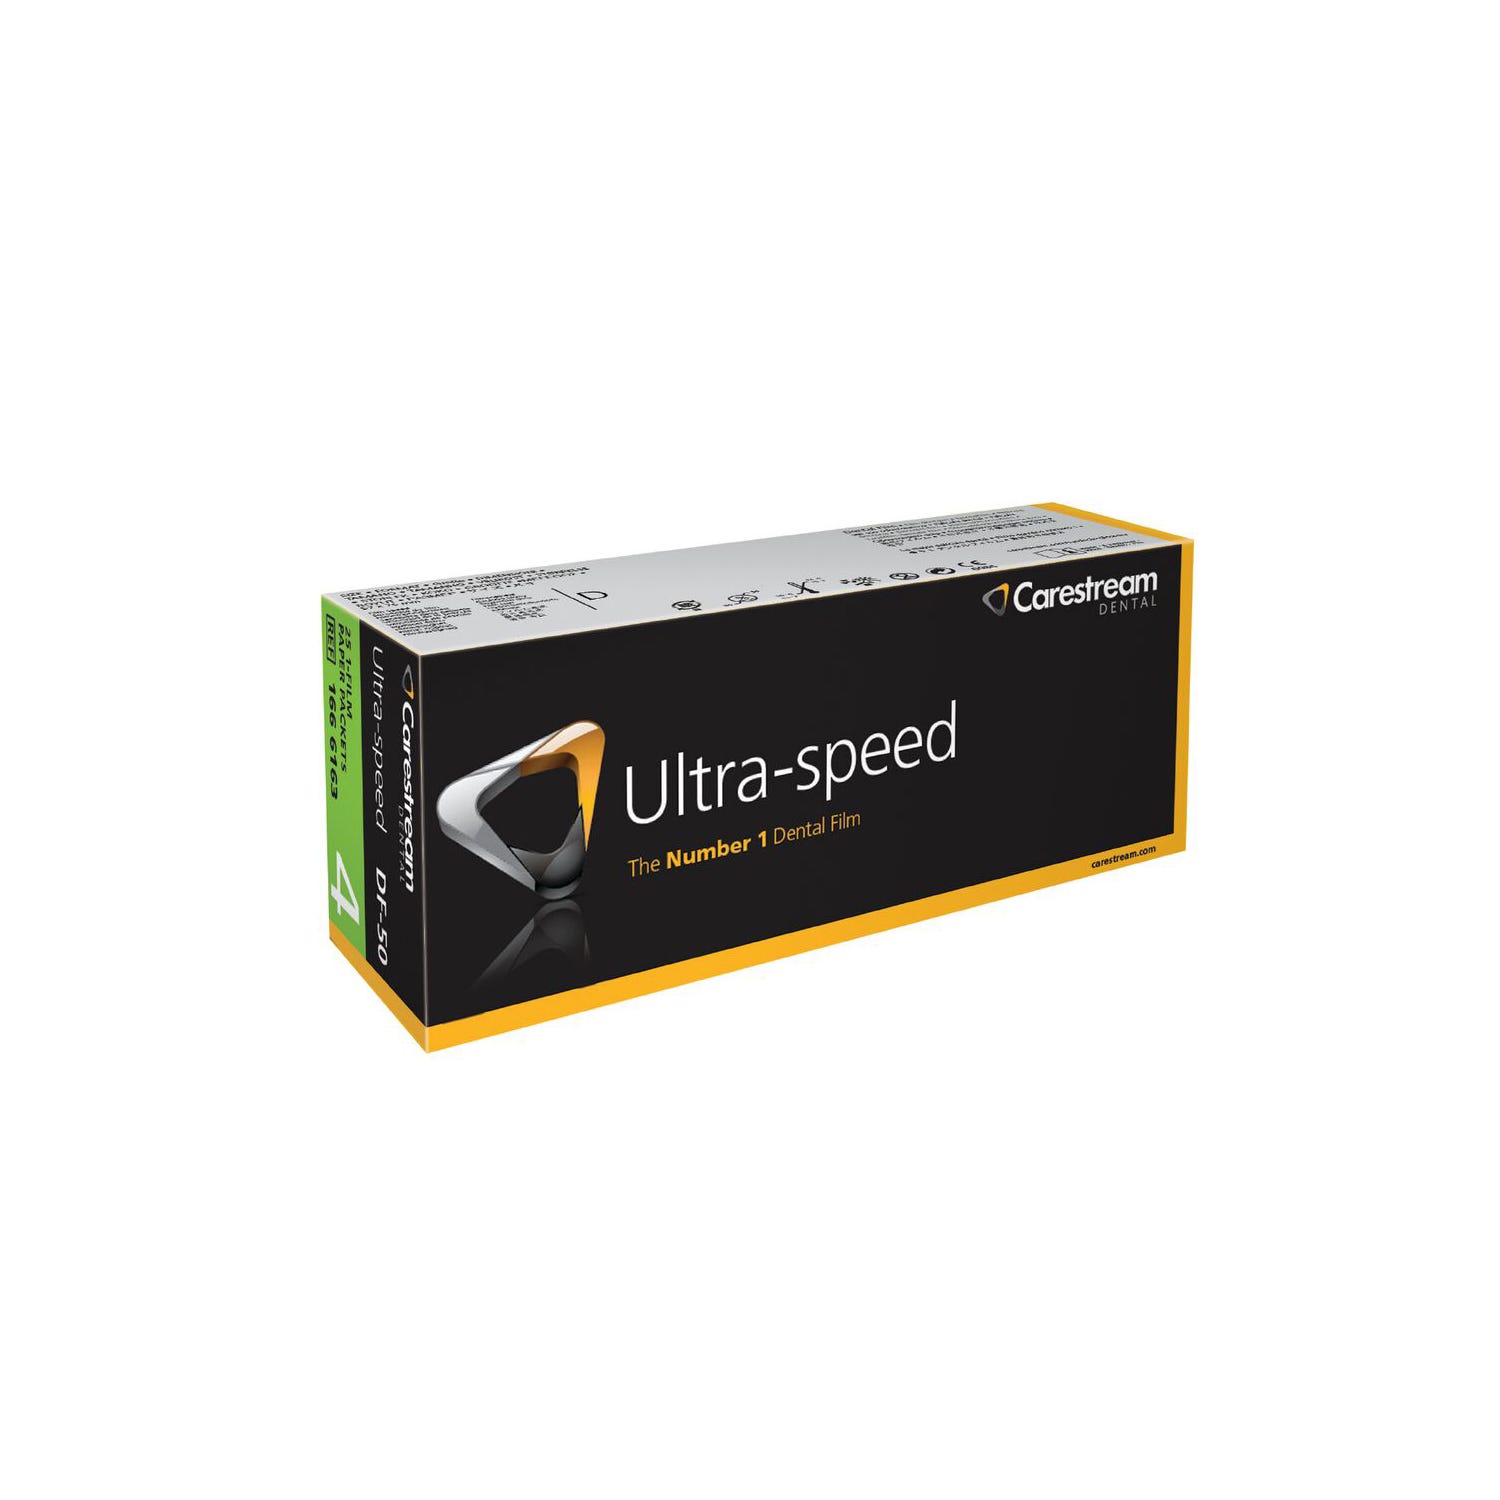 Ultra-speed™ Intraoral Dental Film, Size 4, DF-50, Occlusal Paper Packets - 25/Box